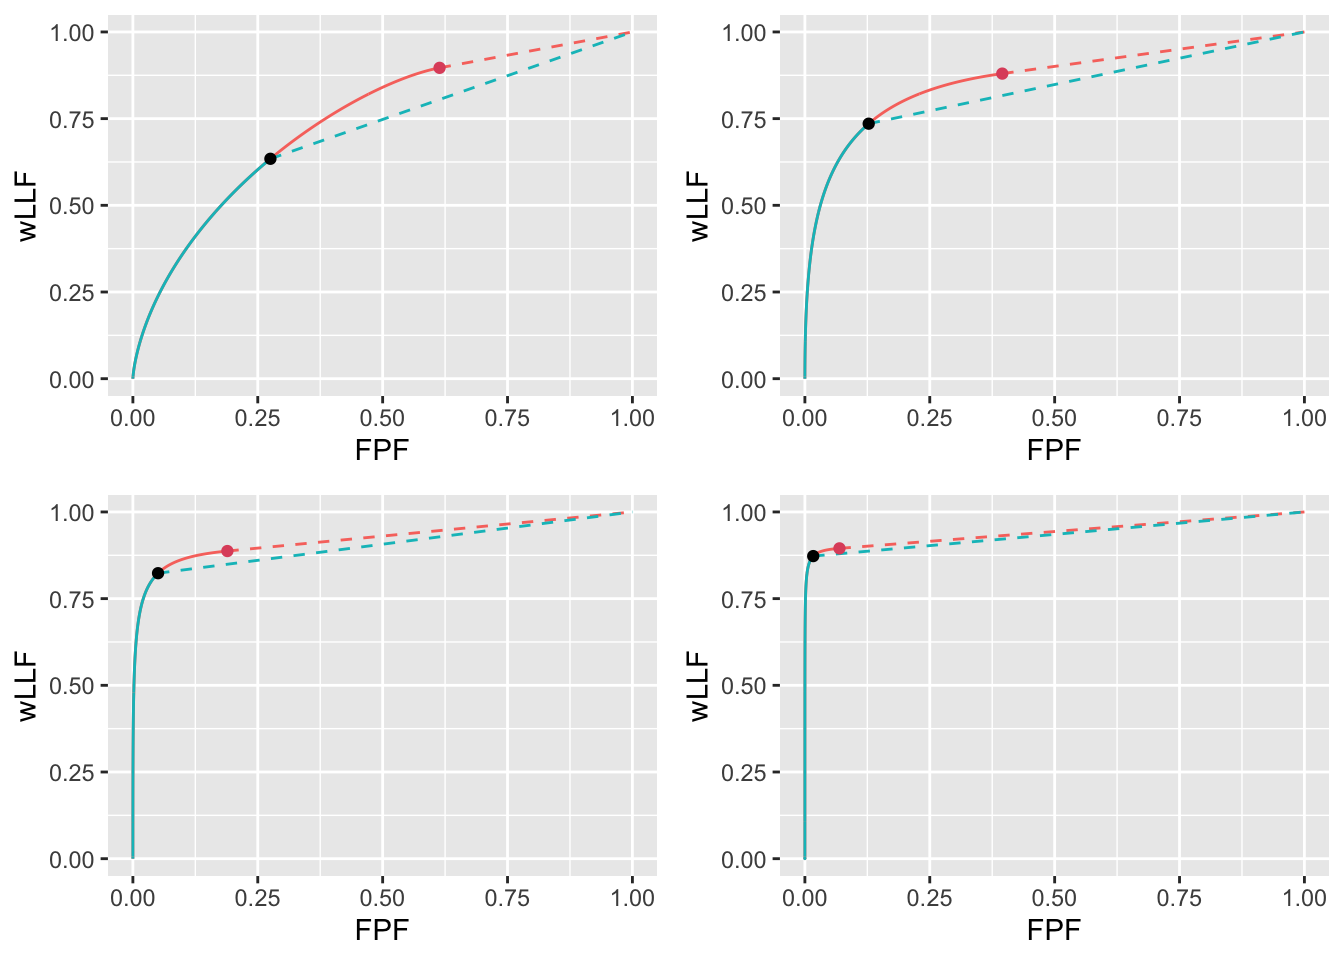 Varying $\mu$ wAFROC plots for the two optimization methods with superimposed operating points with superimposed operating points. The color coding is as in previous figures. The values of $\mu$ are: top-left $\mu = 1$, top-right $\mu = 2$, bottom-left $\mu = 3$ and bottom-right $\mu = 4$.